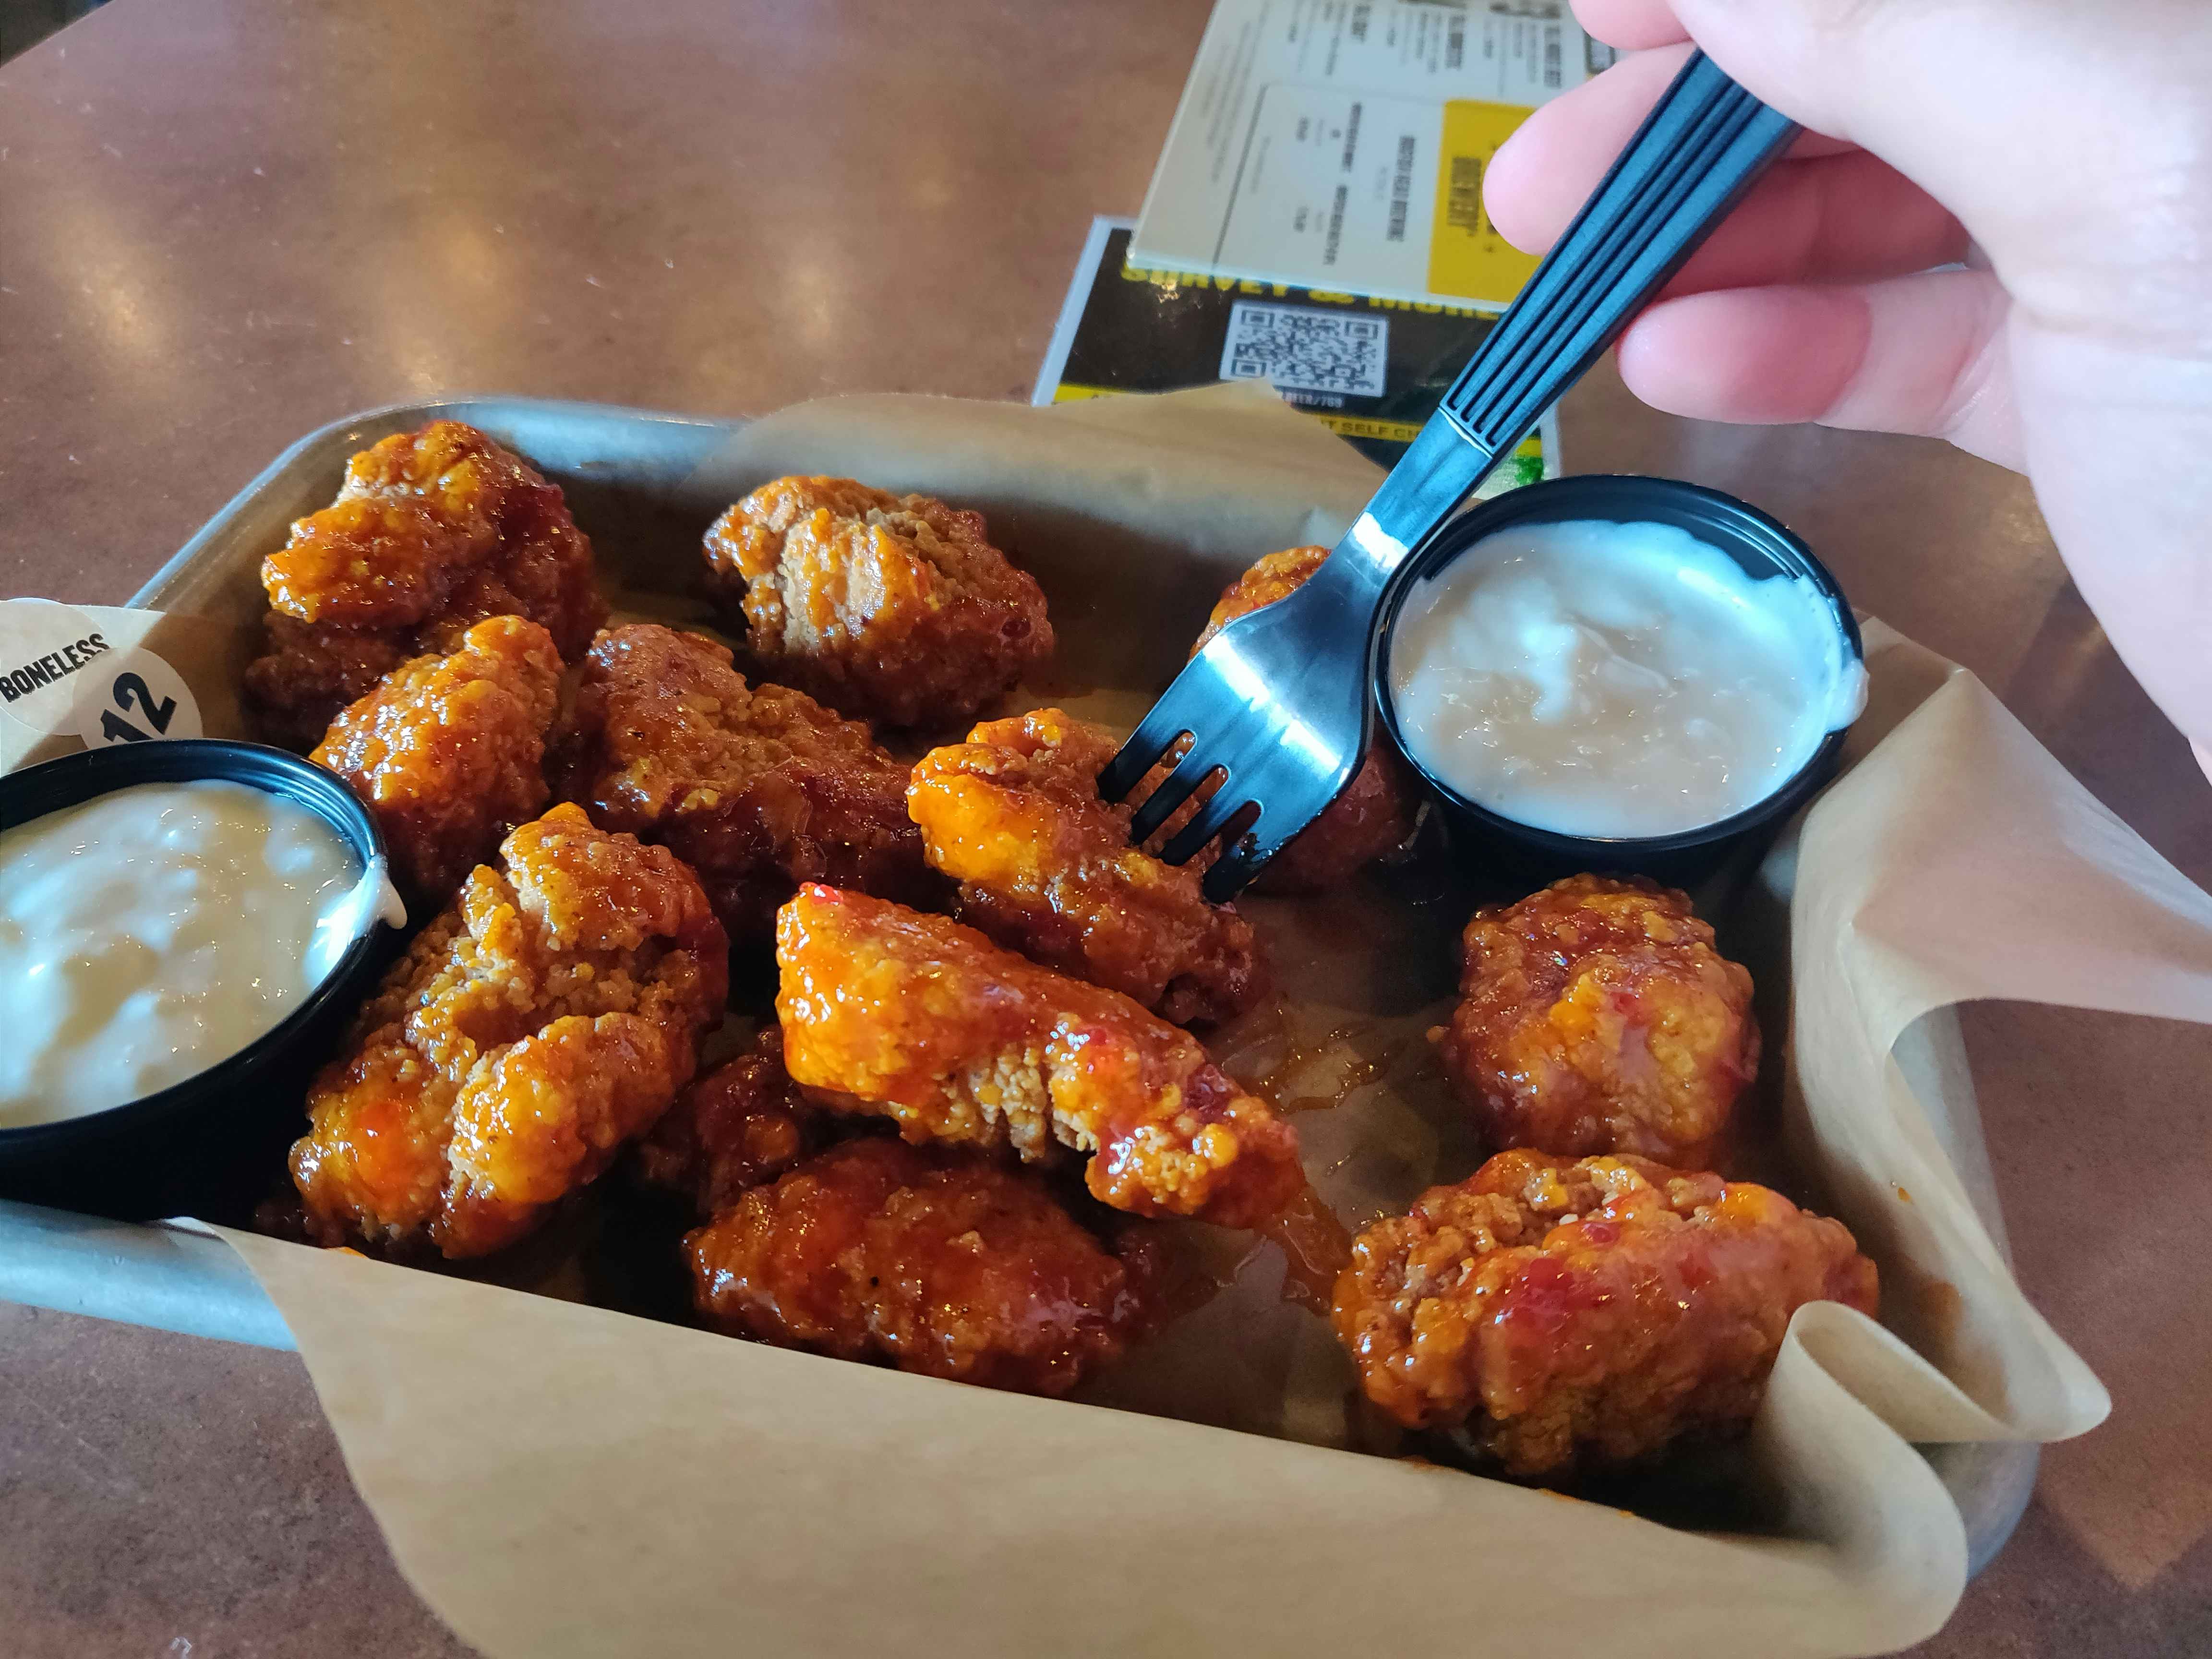 A person using a fork to pick up a boneless wing out of a platter of boneless wings and two dip cups.